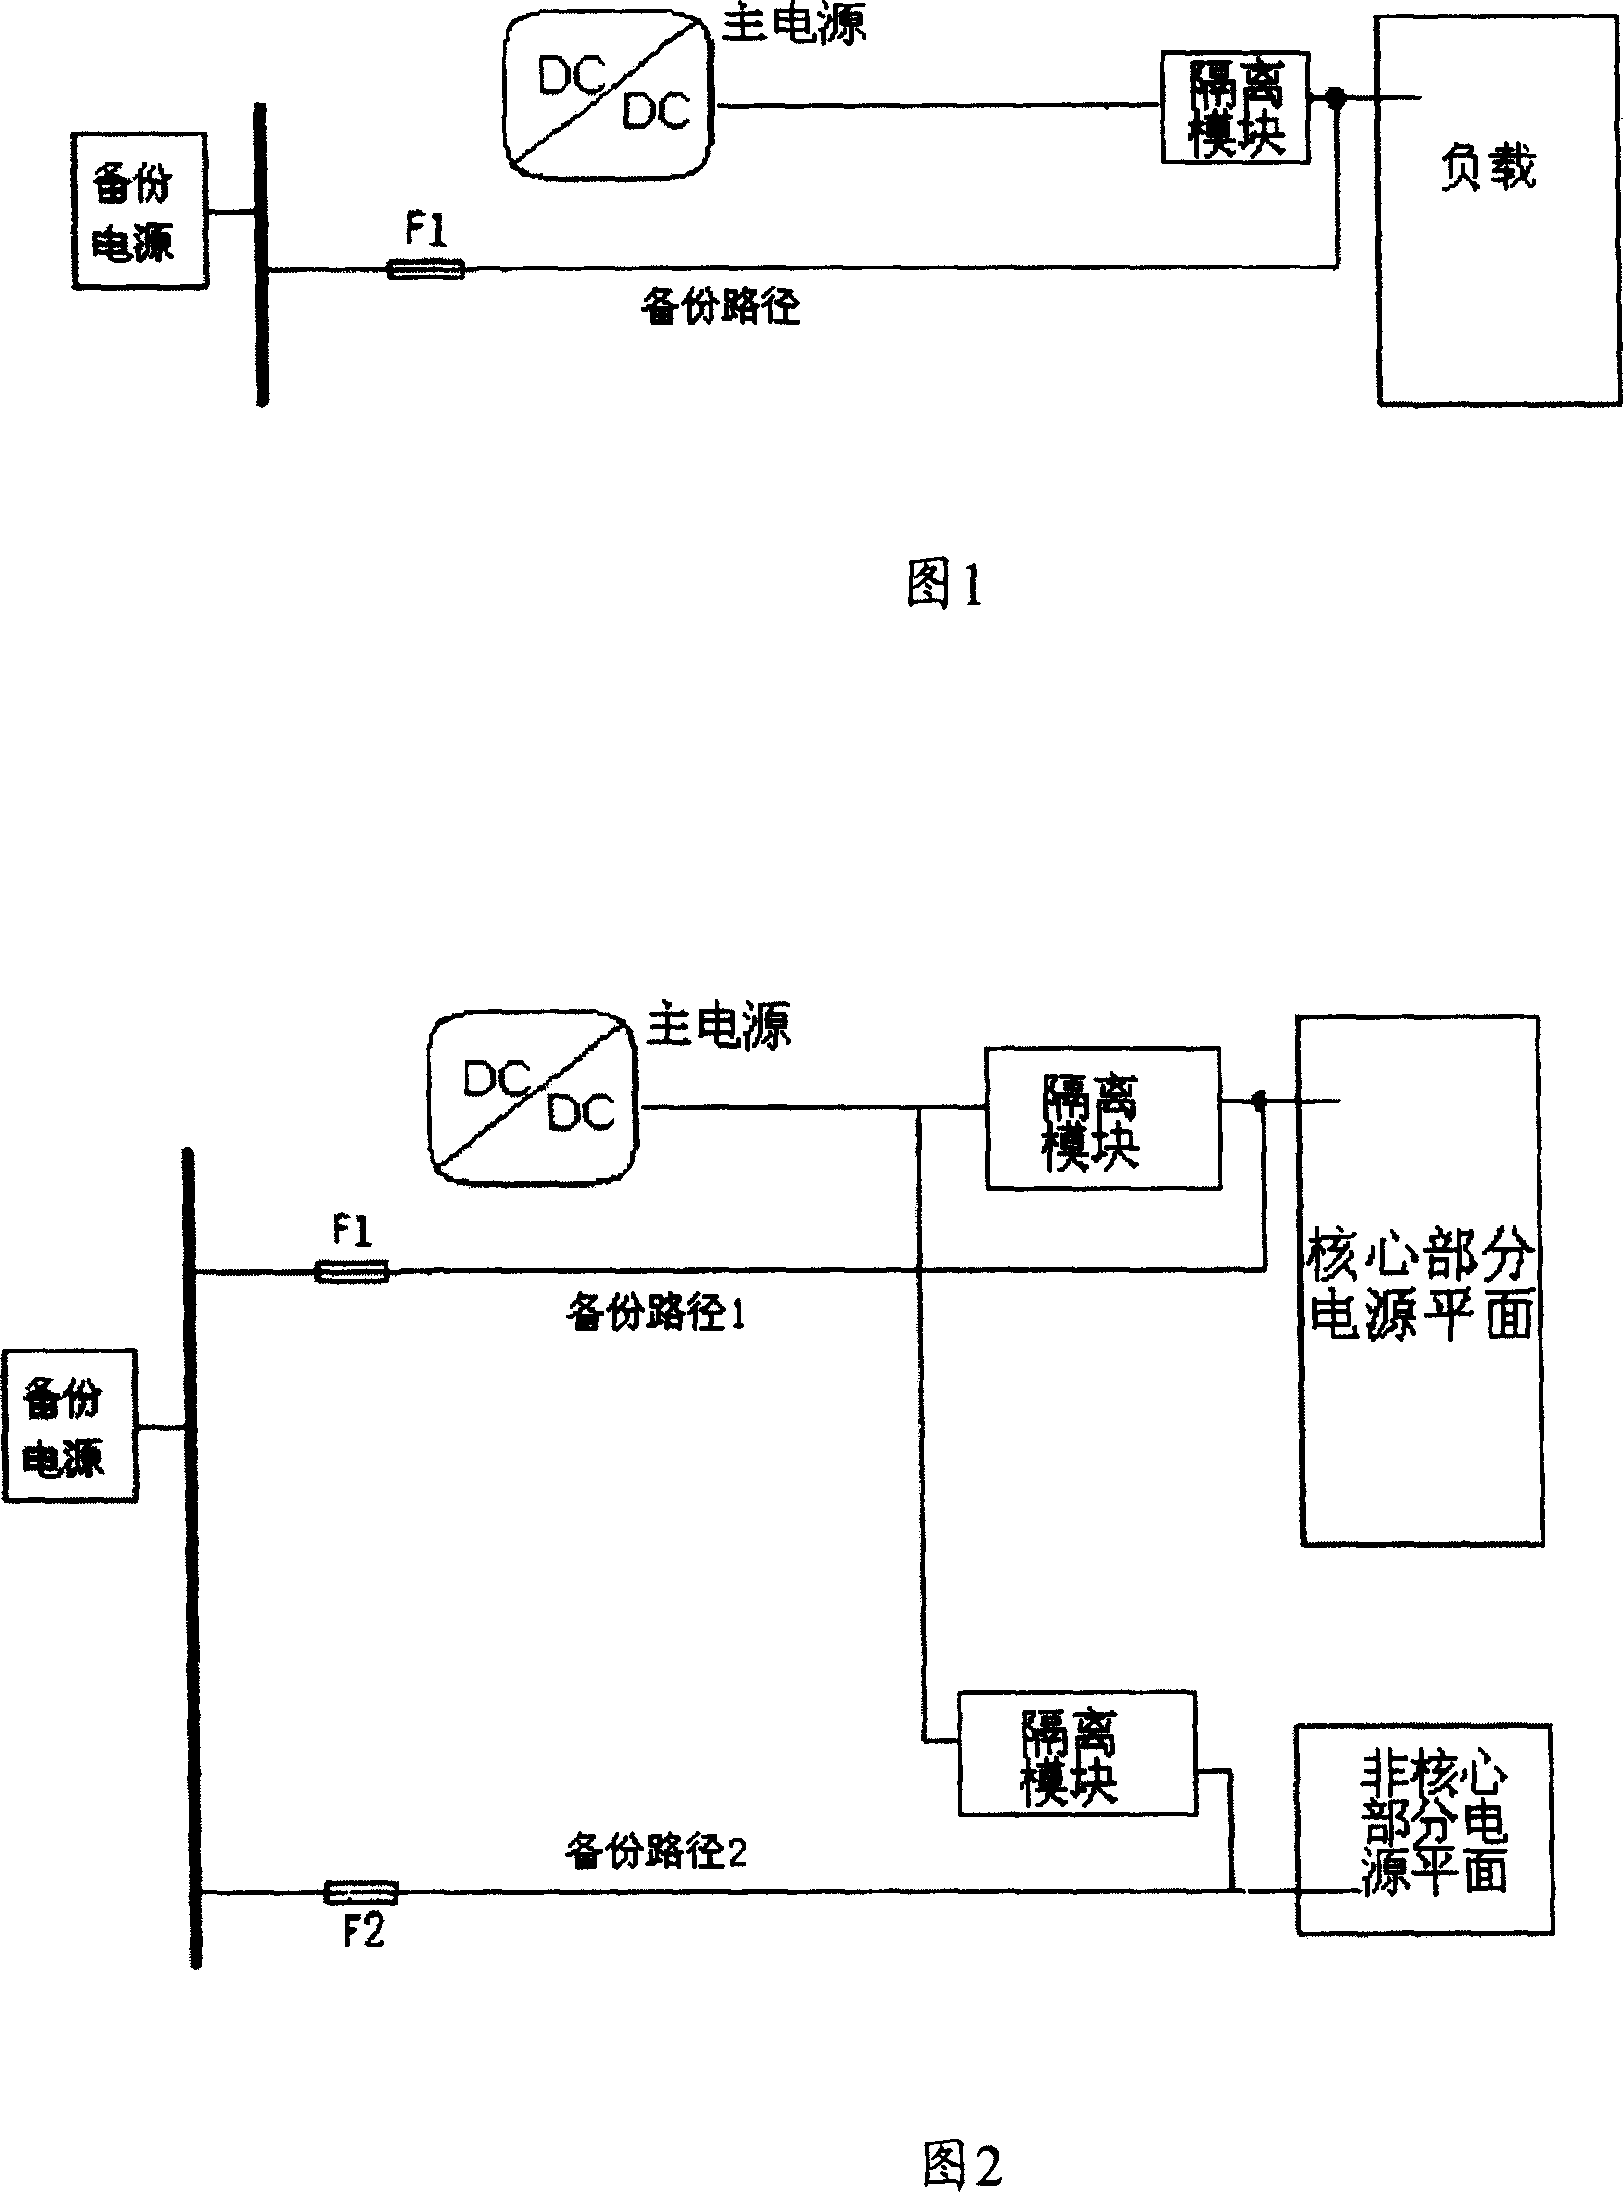 Single-plate power-supply system